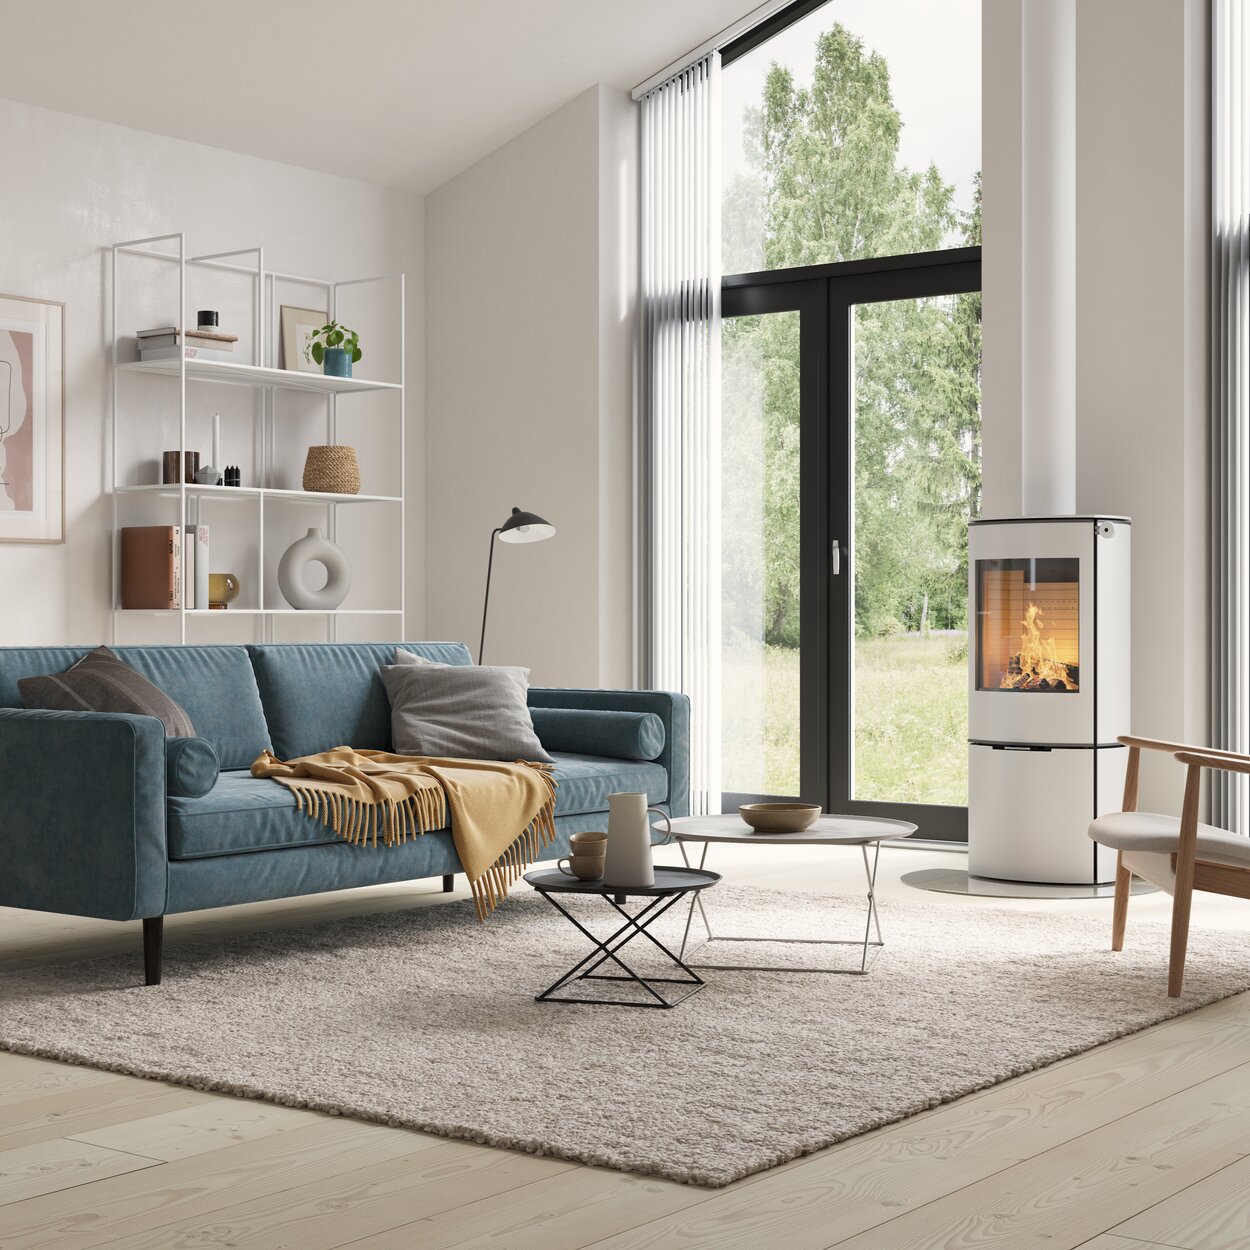 Wood stove CARO 110 in white with steel door in a modern, bright living atmosphere